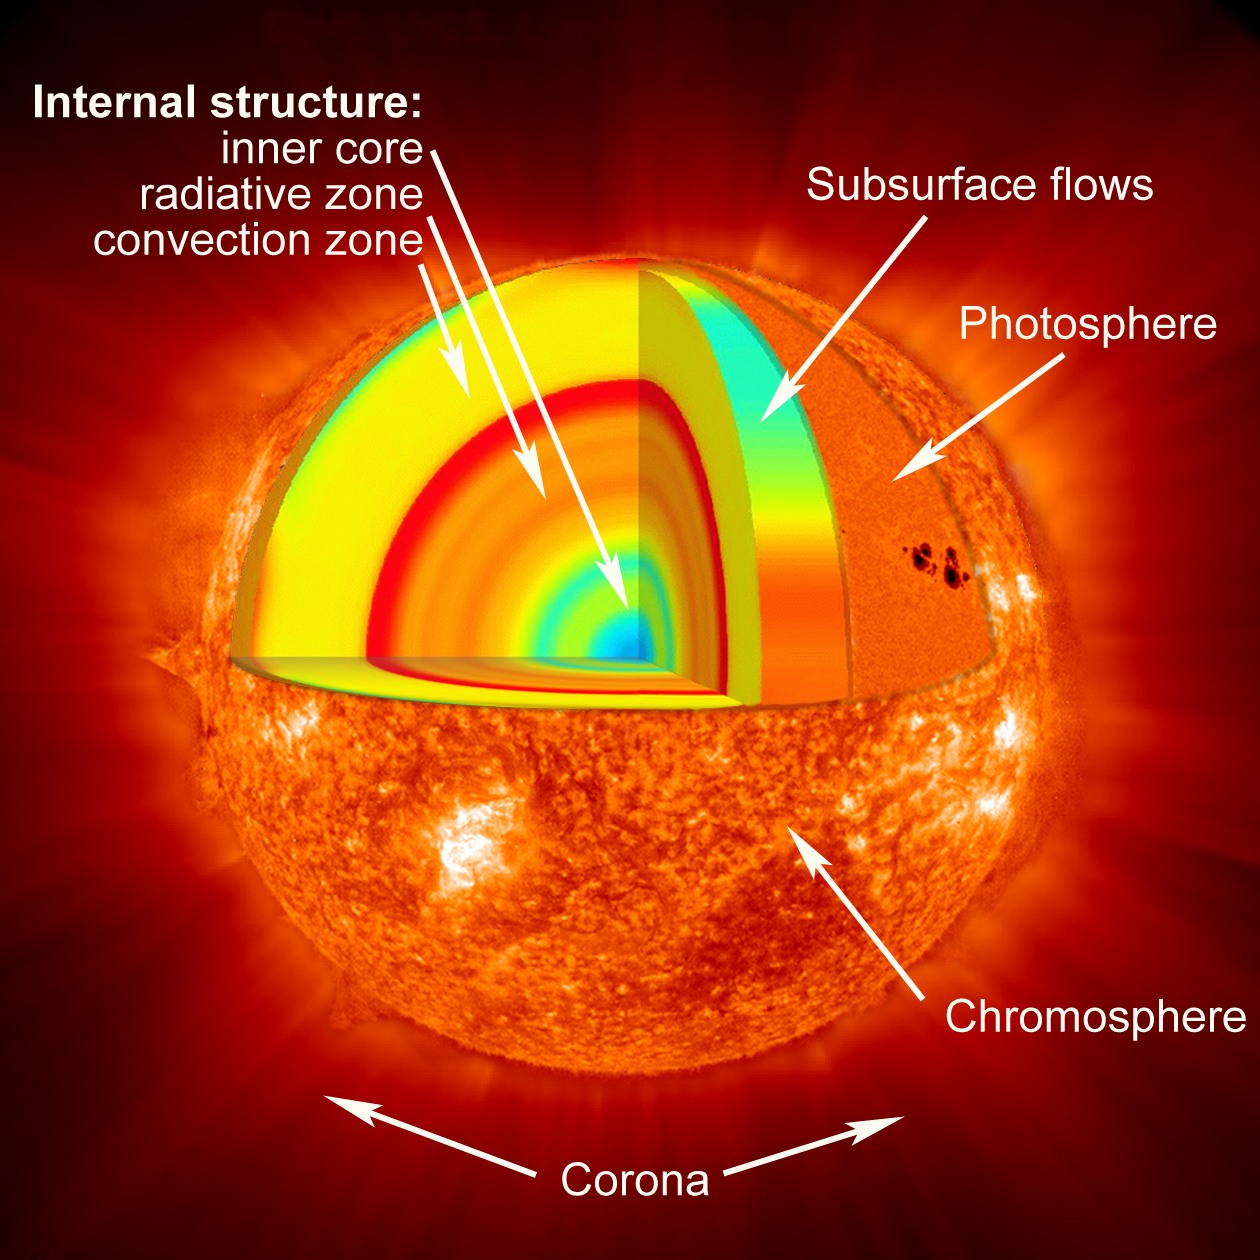 Cross section of the Sun